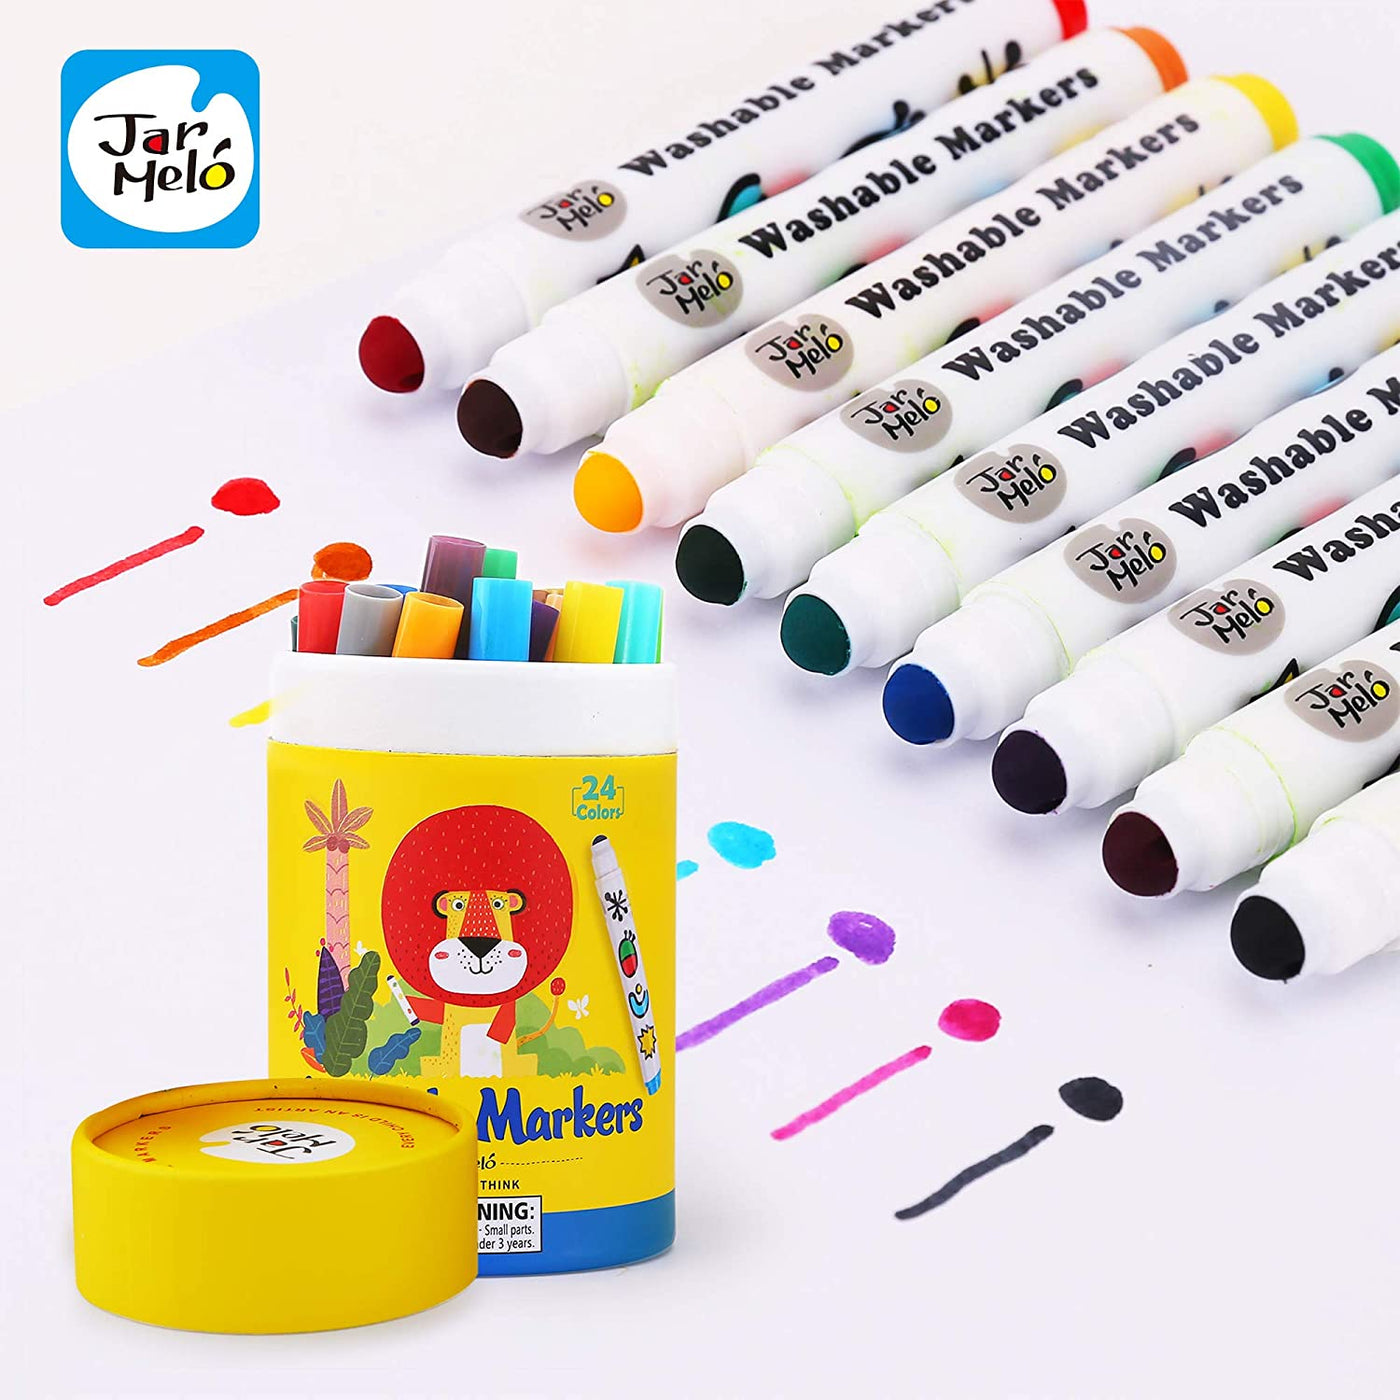 Special Round Tip Washable Markers - 24 Pcs | Jar Melo